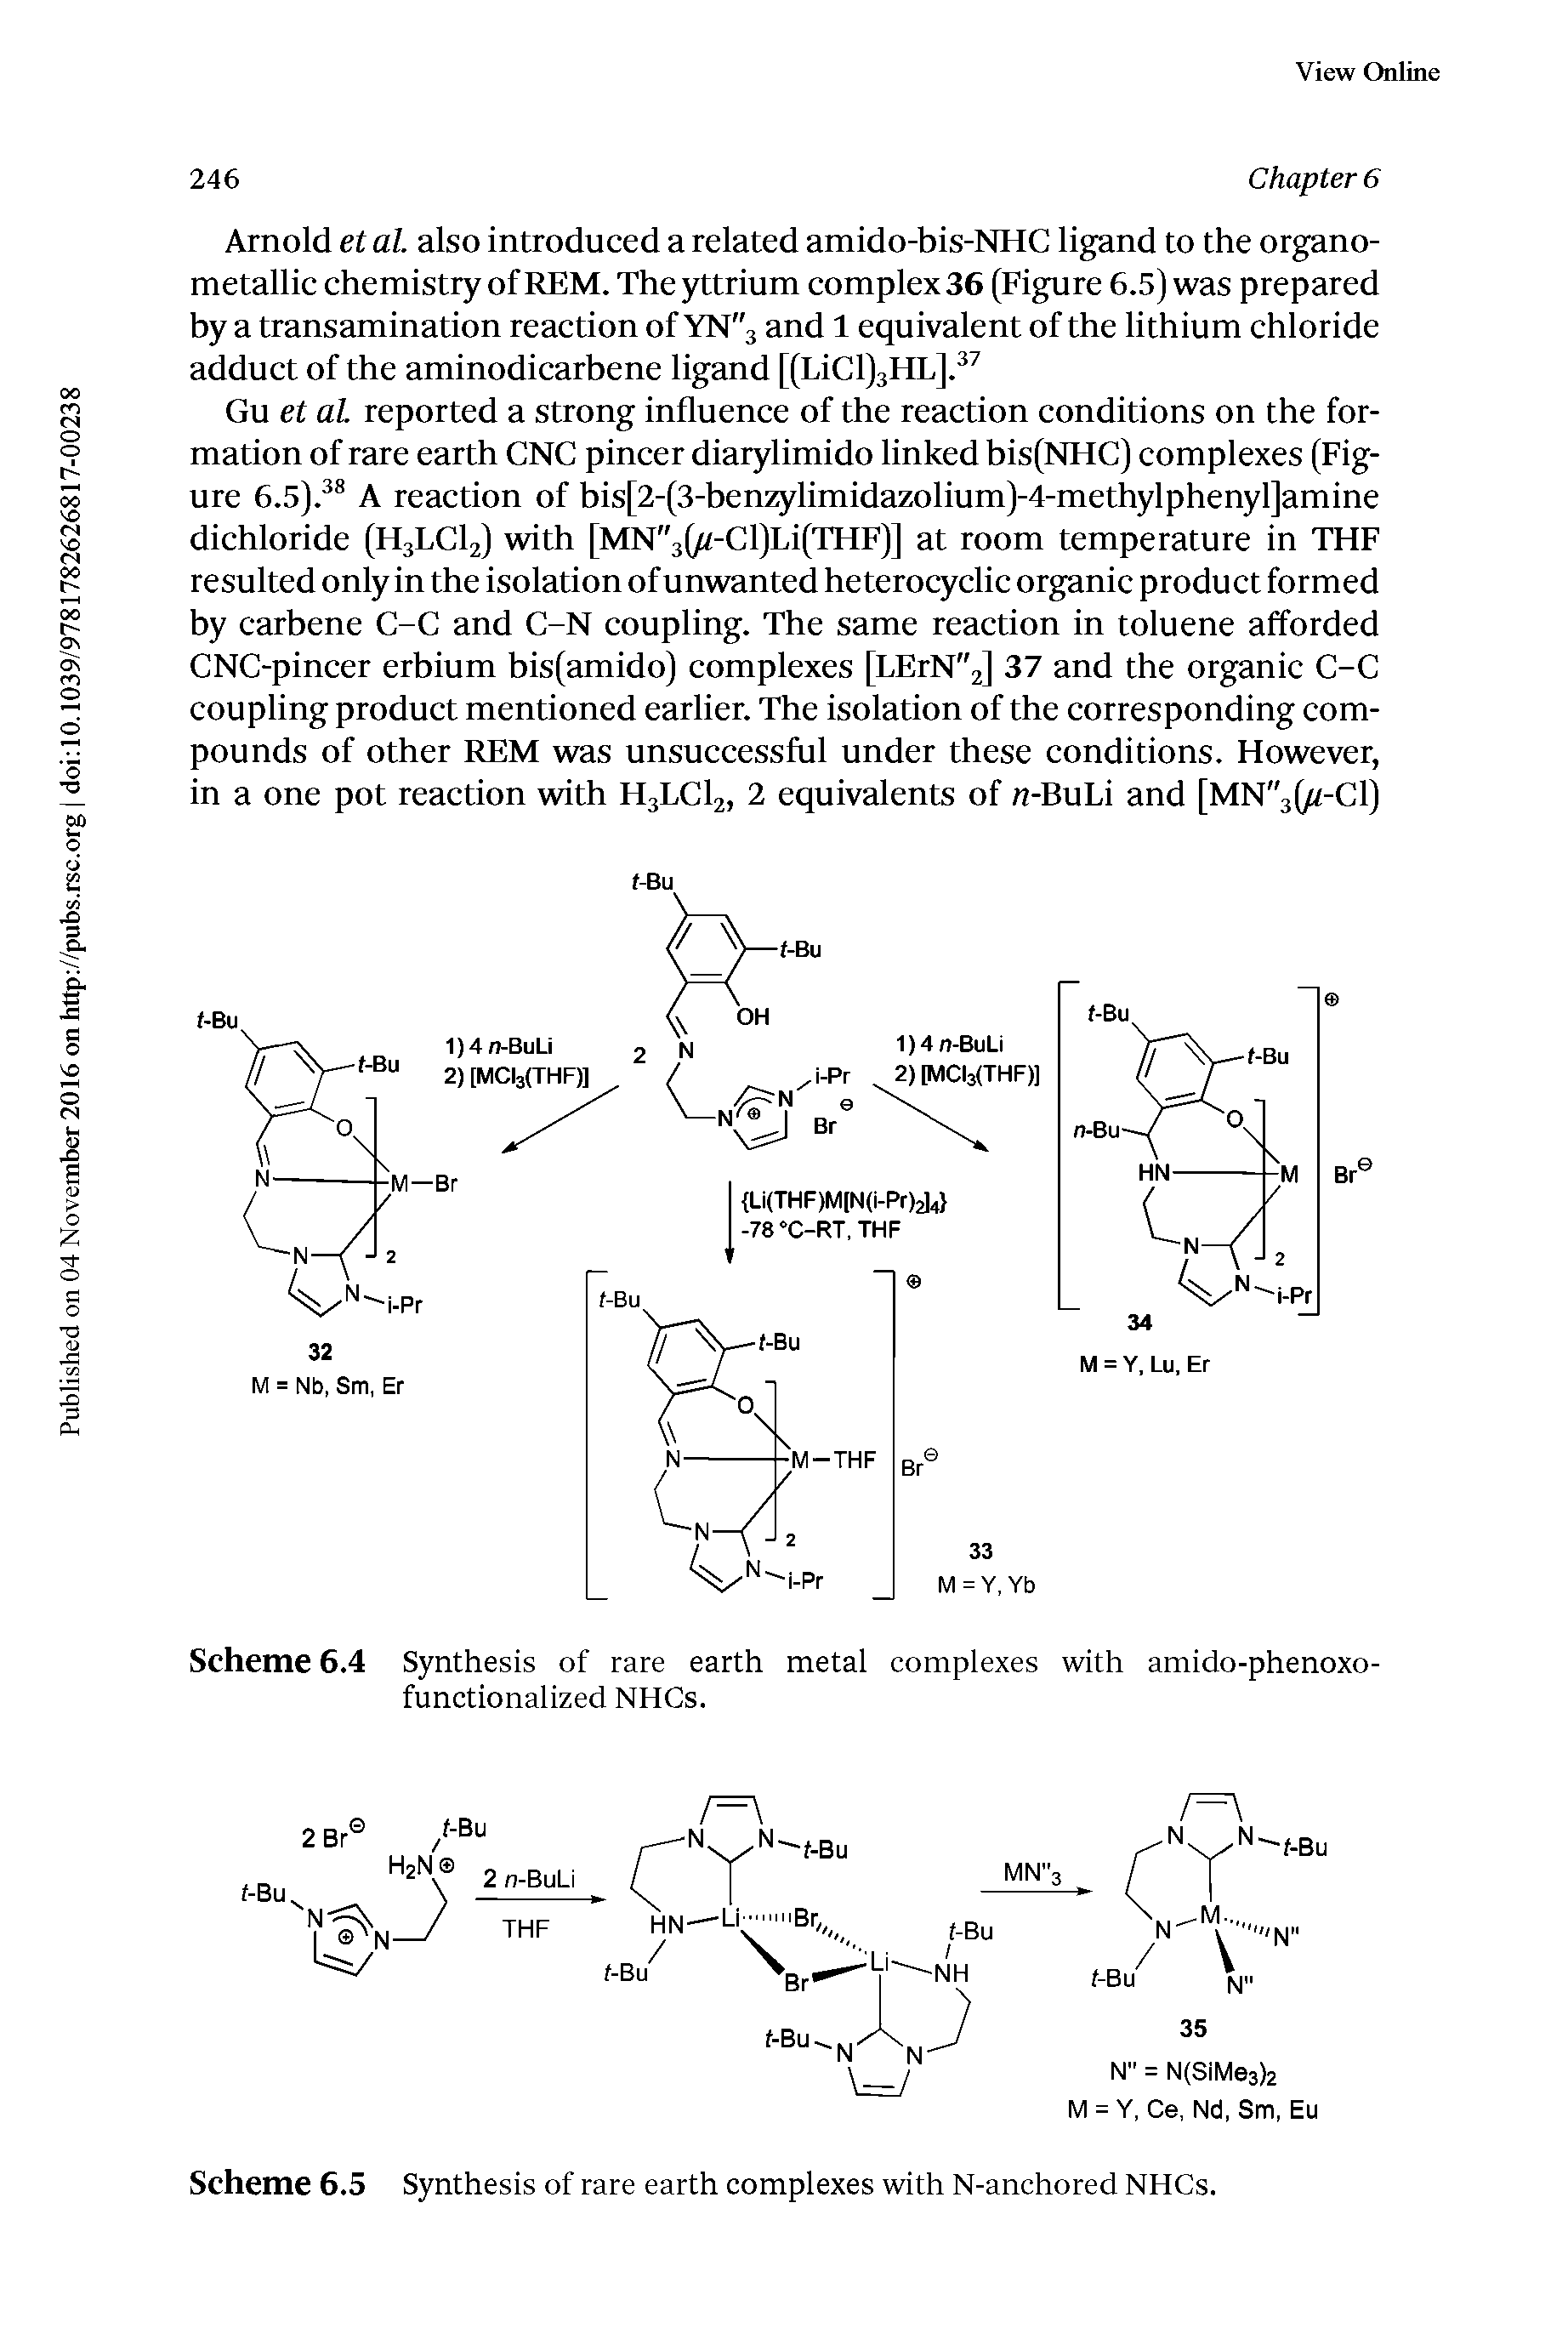 Scheme 6.4 Synthesis of rare earth metal complexes with amido-phenoxo-functionalized NHCs.